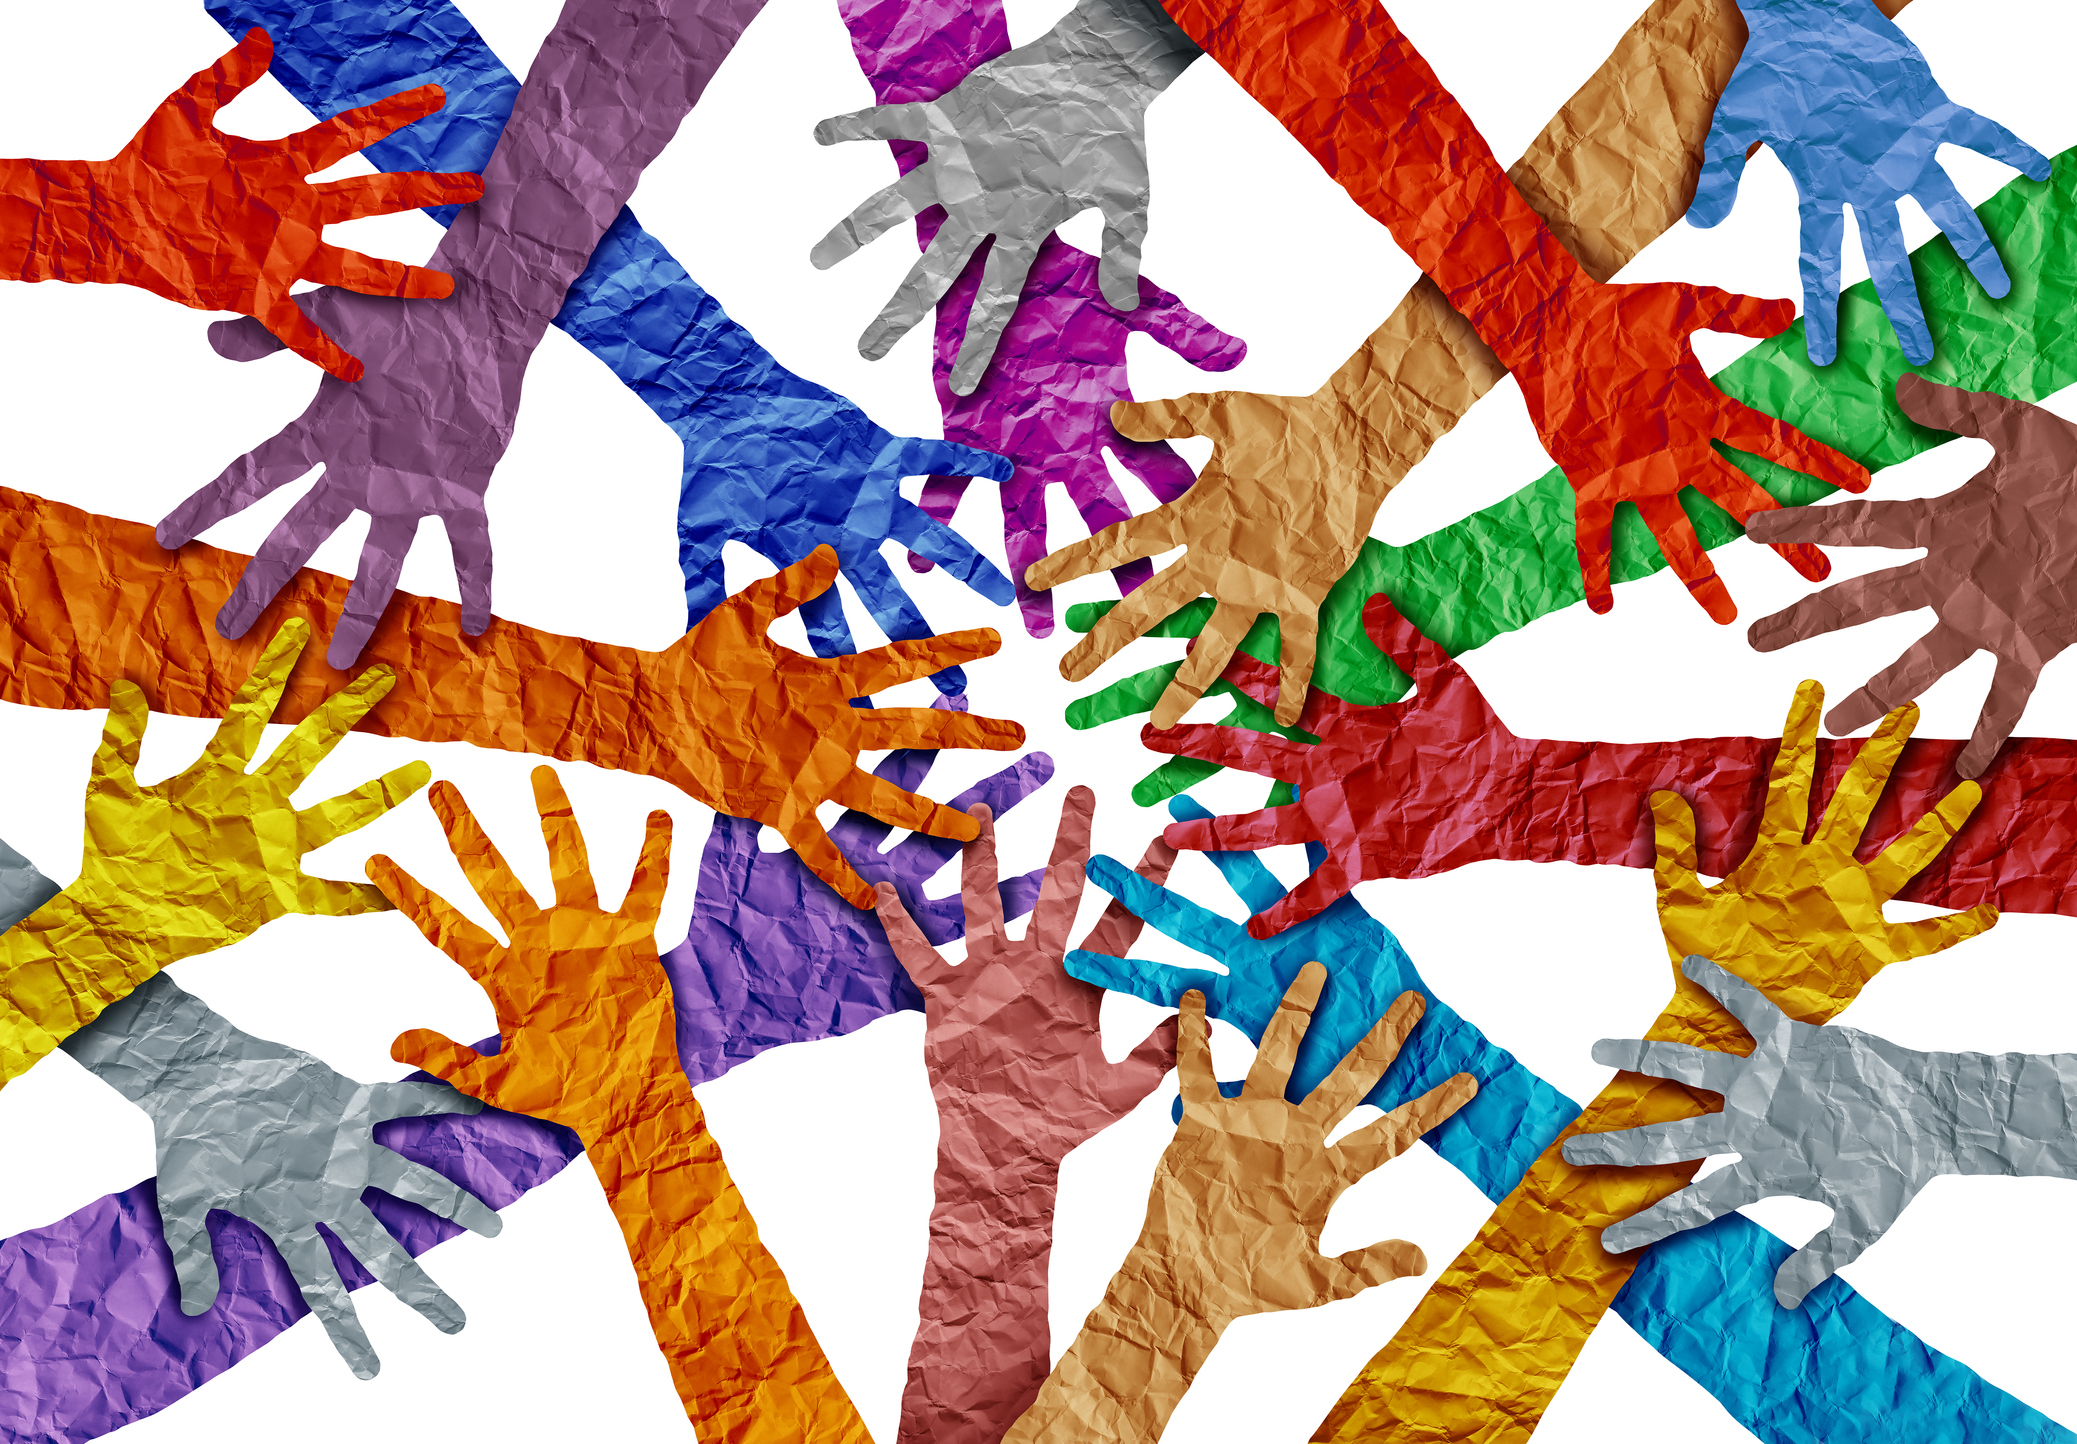 Concept of diversity and crowd cooperation symbol as diverse hands holding together in a 3D illustration style.